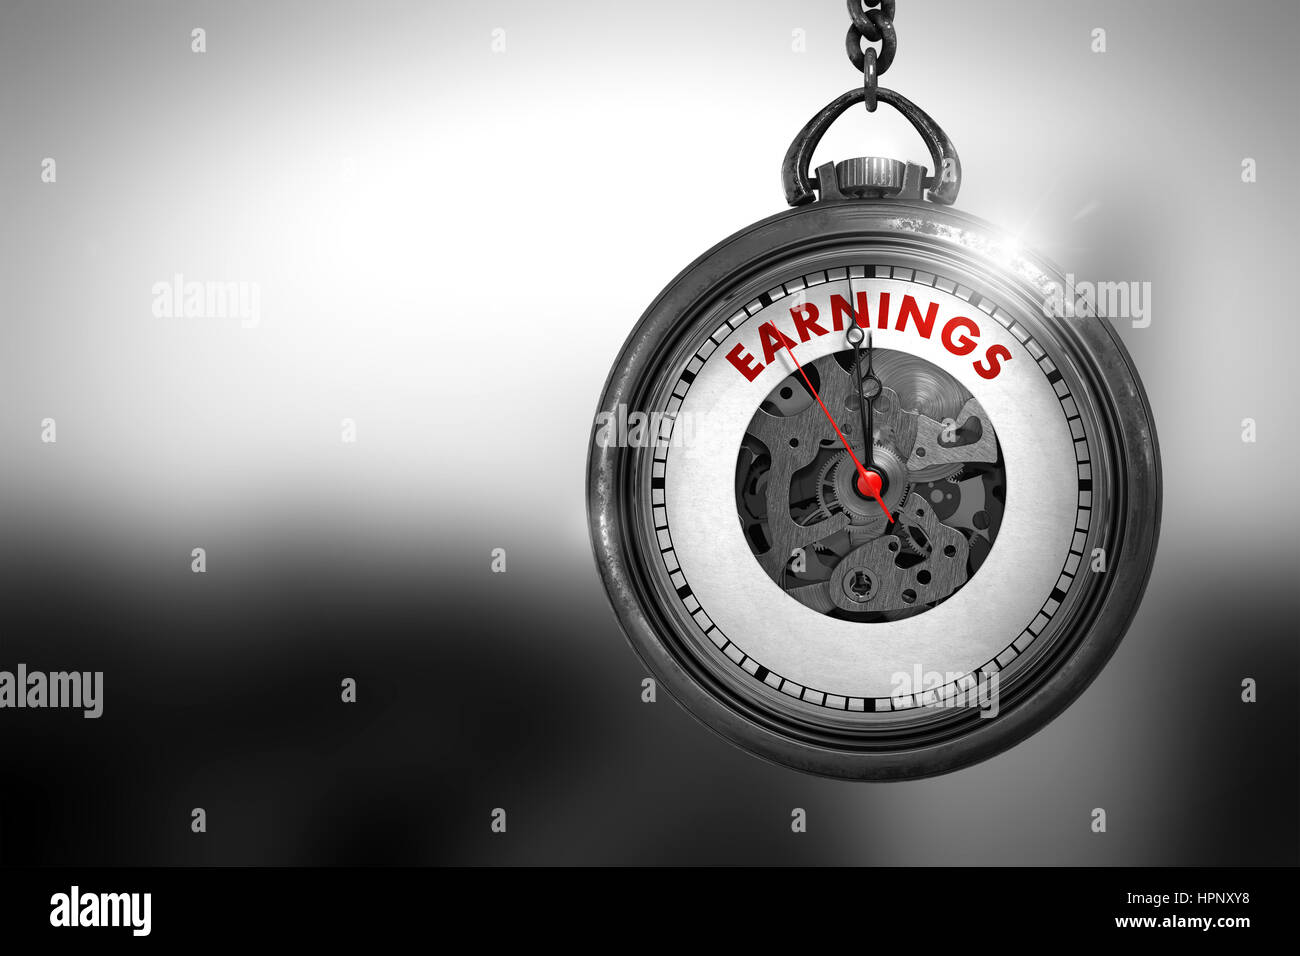 Earnings on Pocket Watch Face. 3D Illustration. Stock Photo